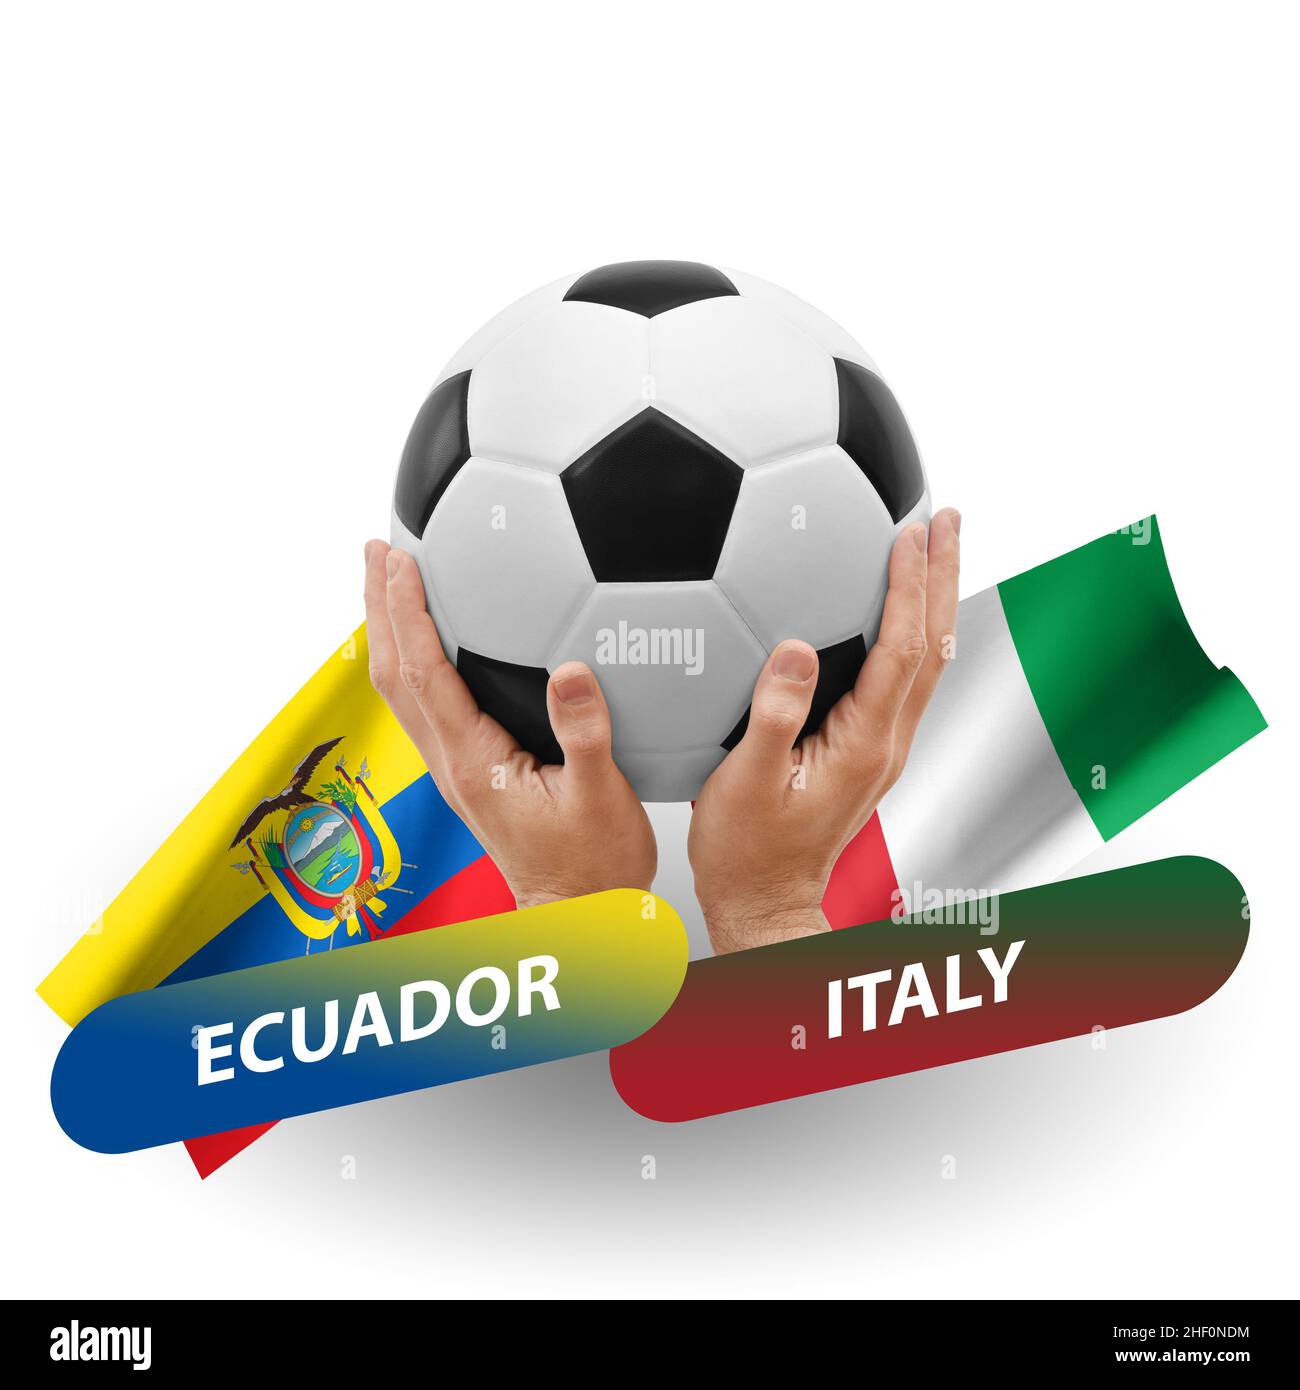 Ecuador vs italy hires stock photography and images Alamy